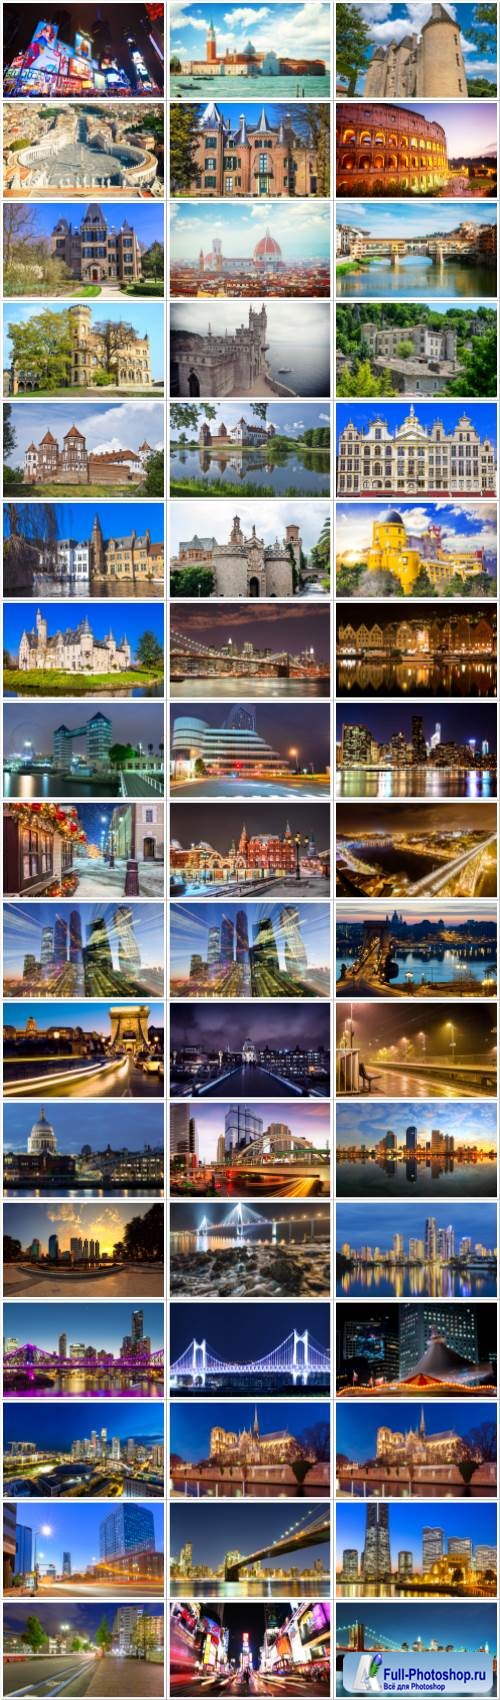 Cities and architecture large selection of stock photos